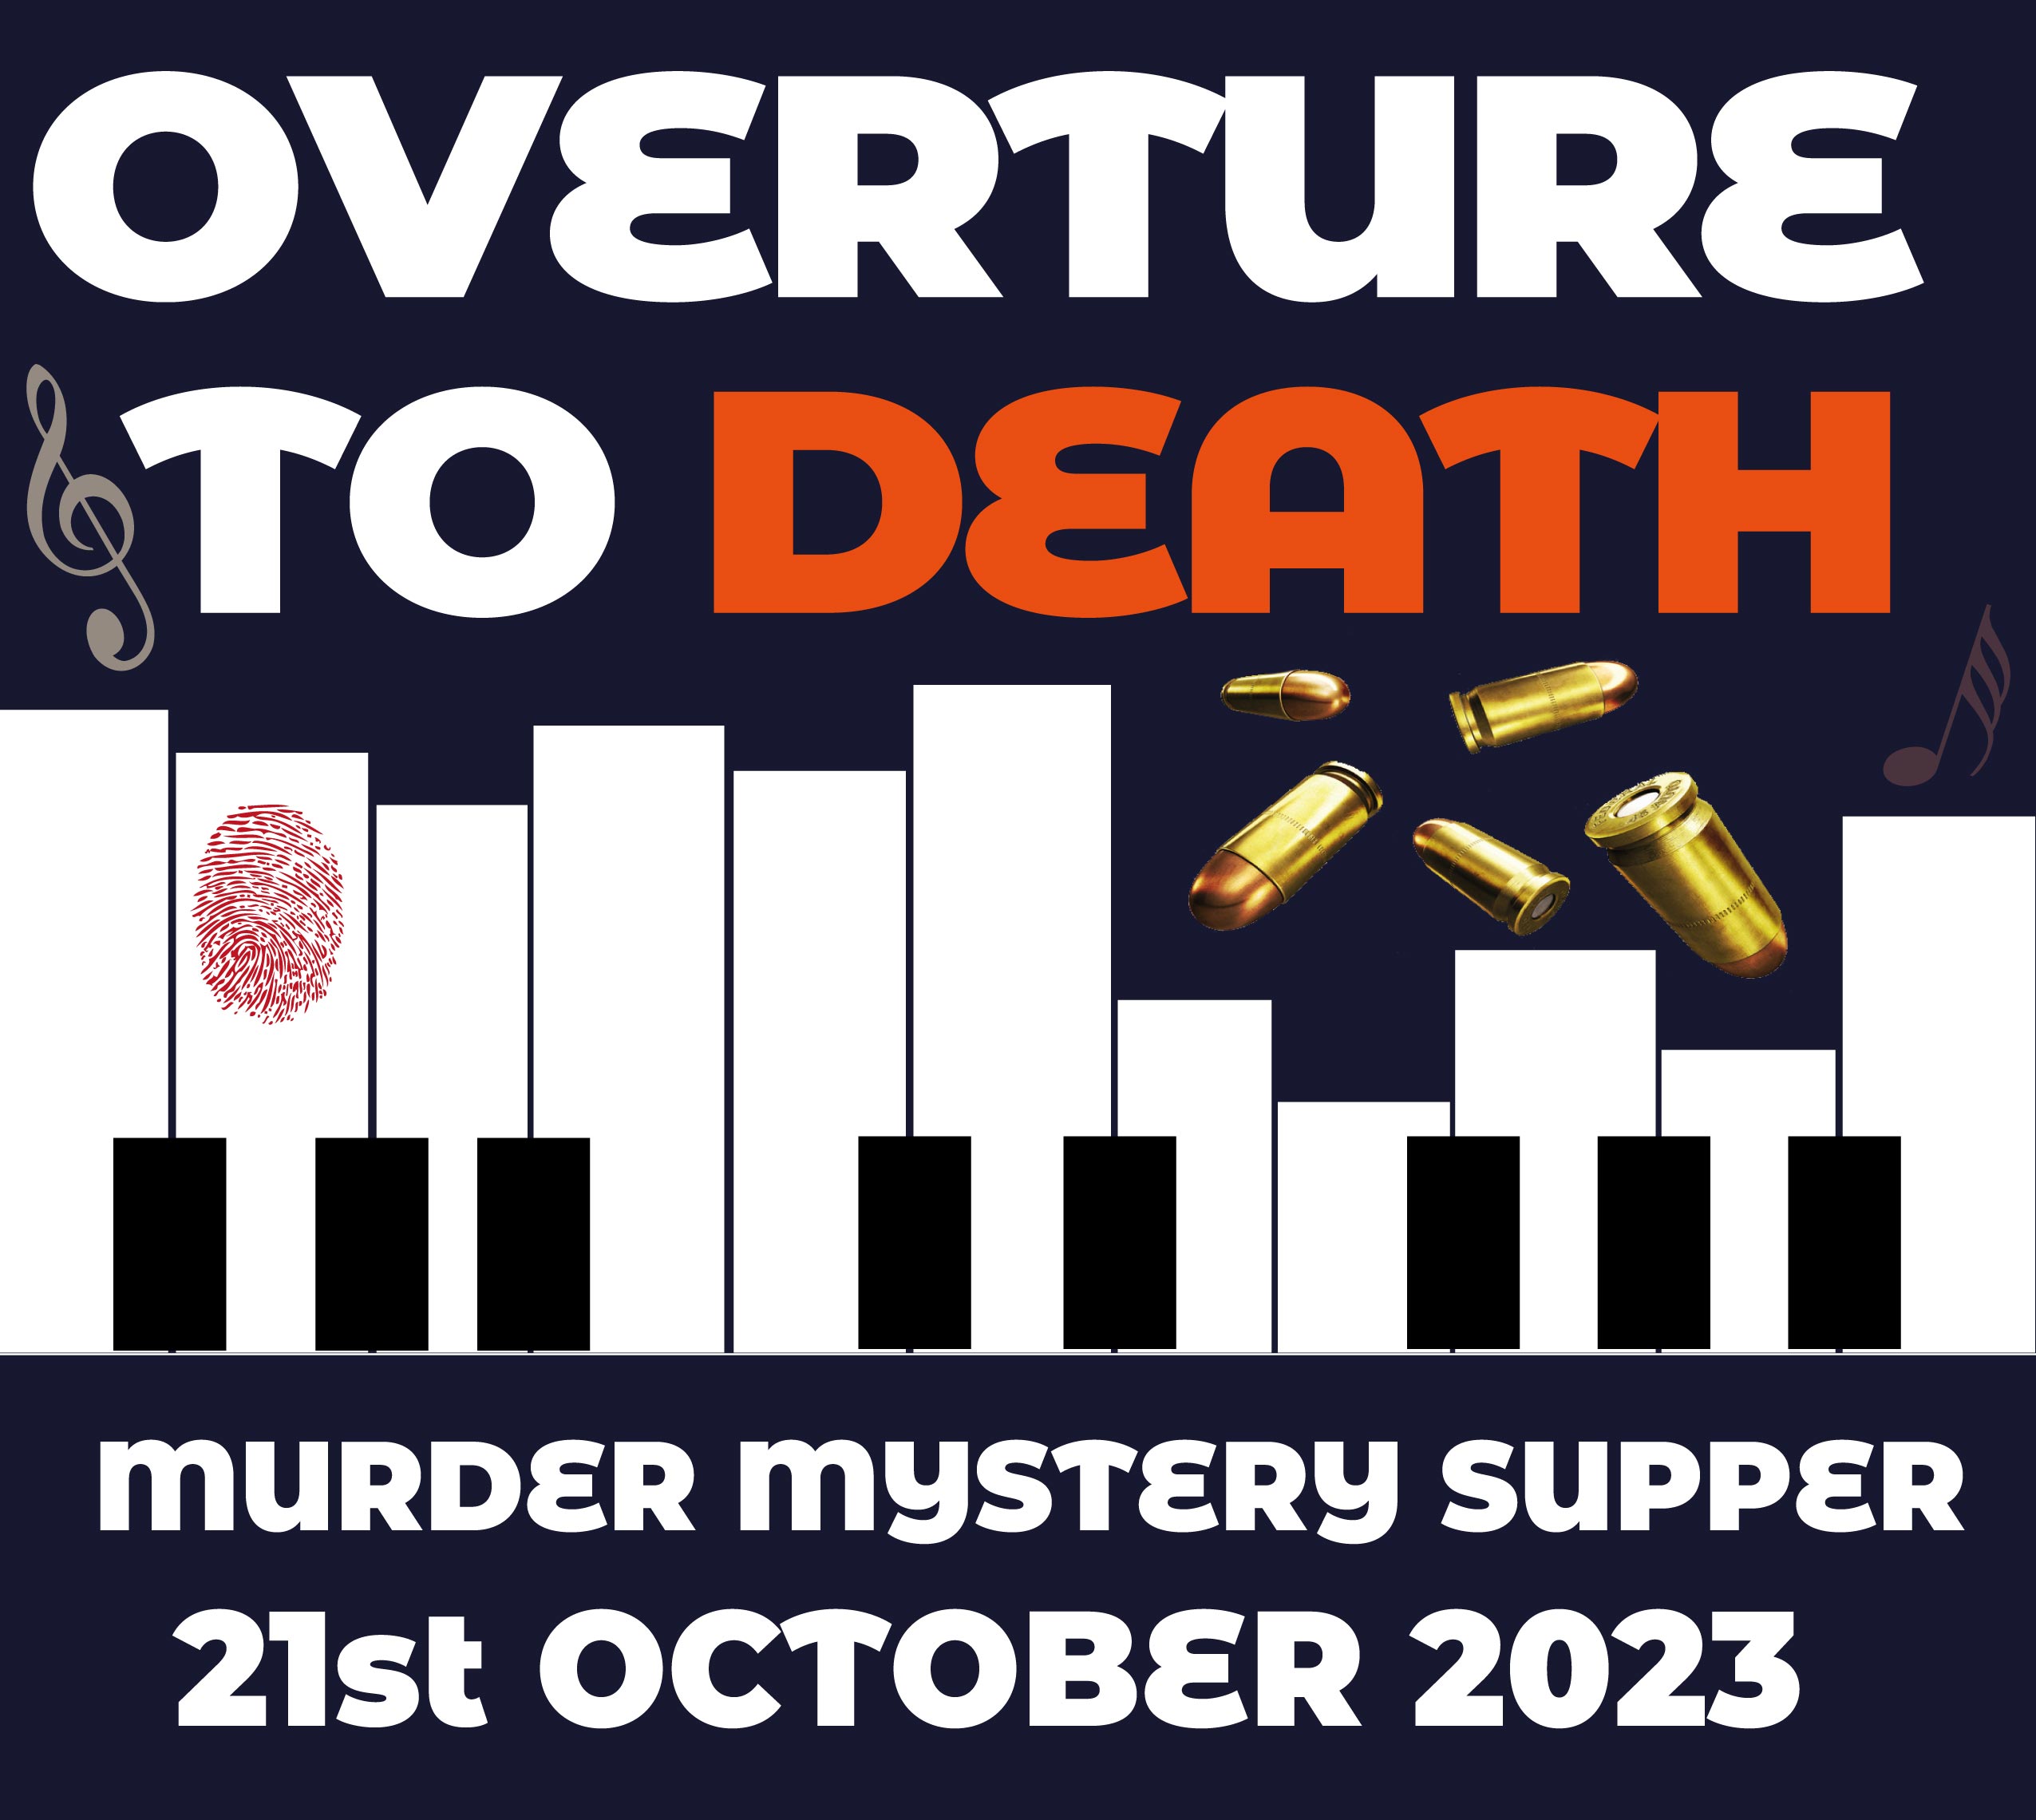 Murder Mystery Supper: Overture To Death! (£29.50pp) SOLD OUT! Contact us to join the waiting list!